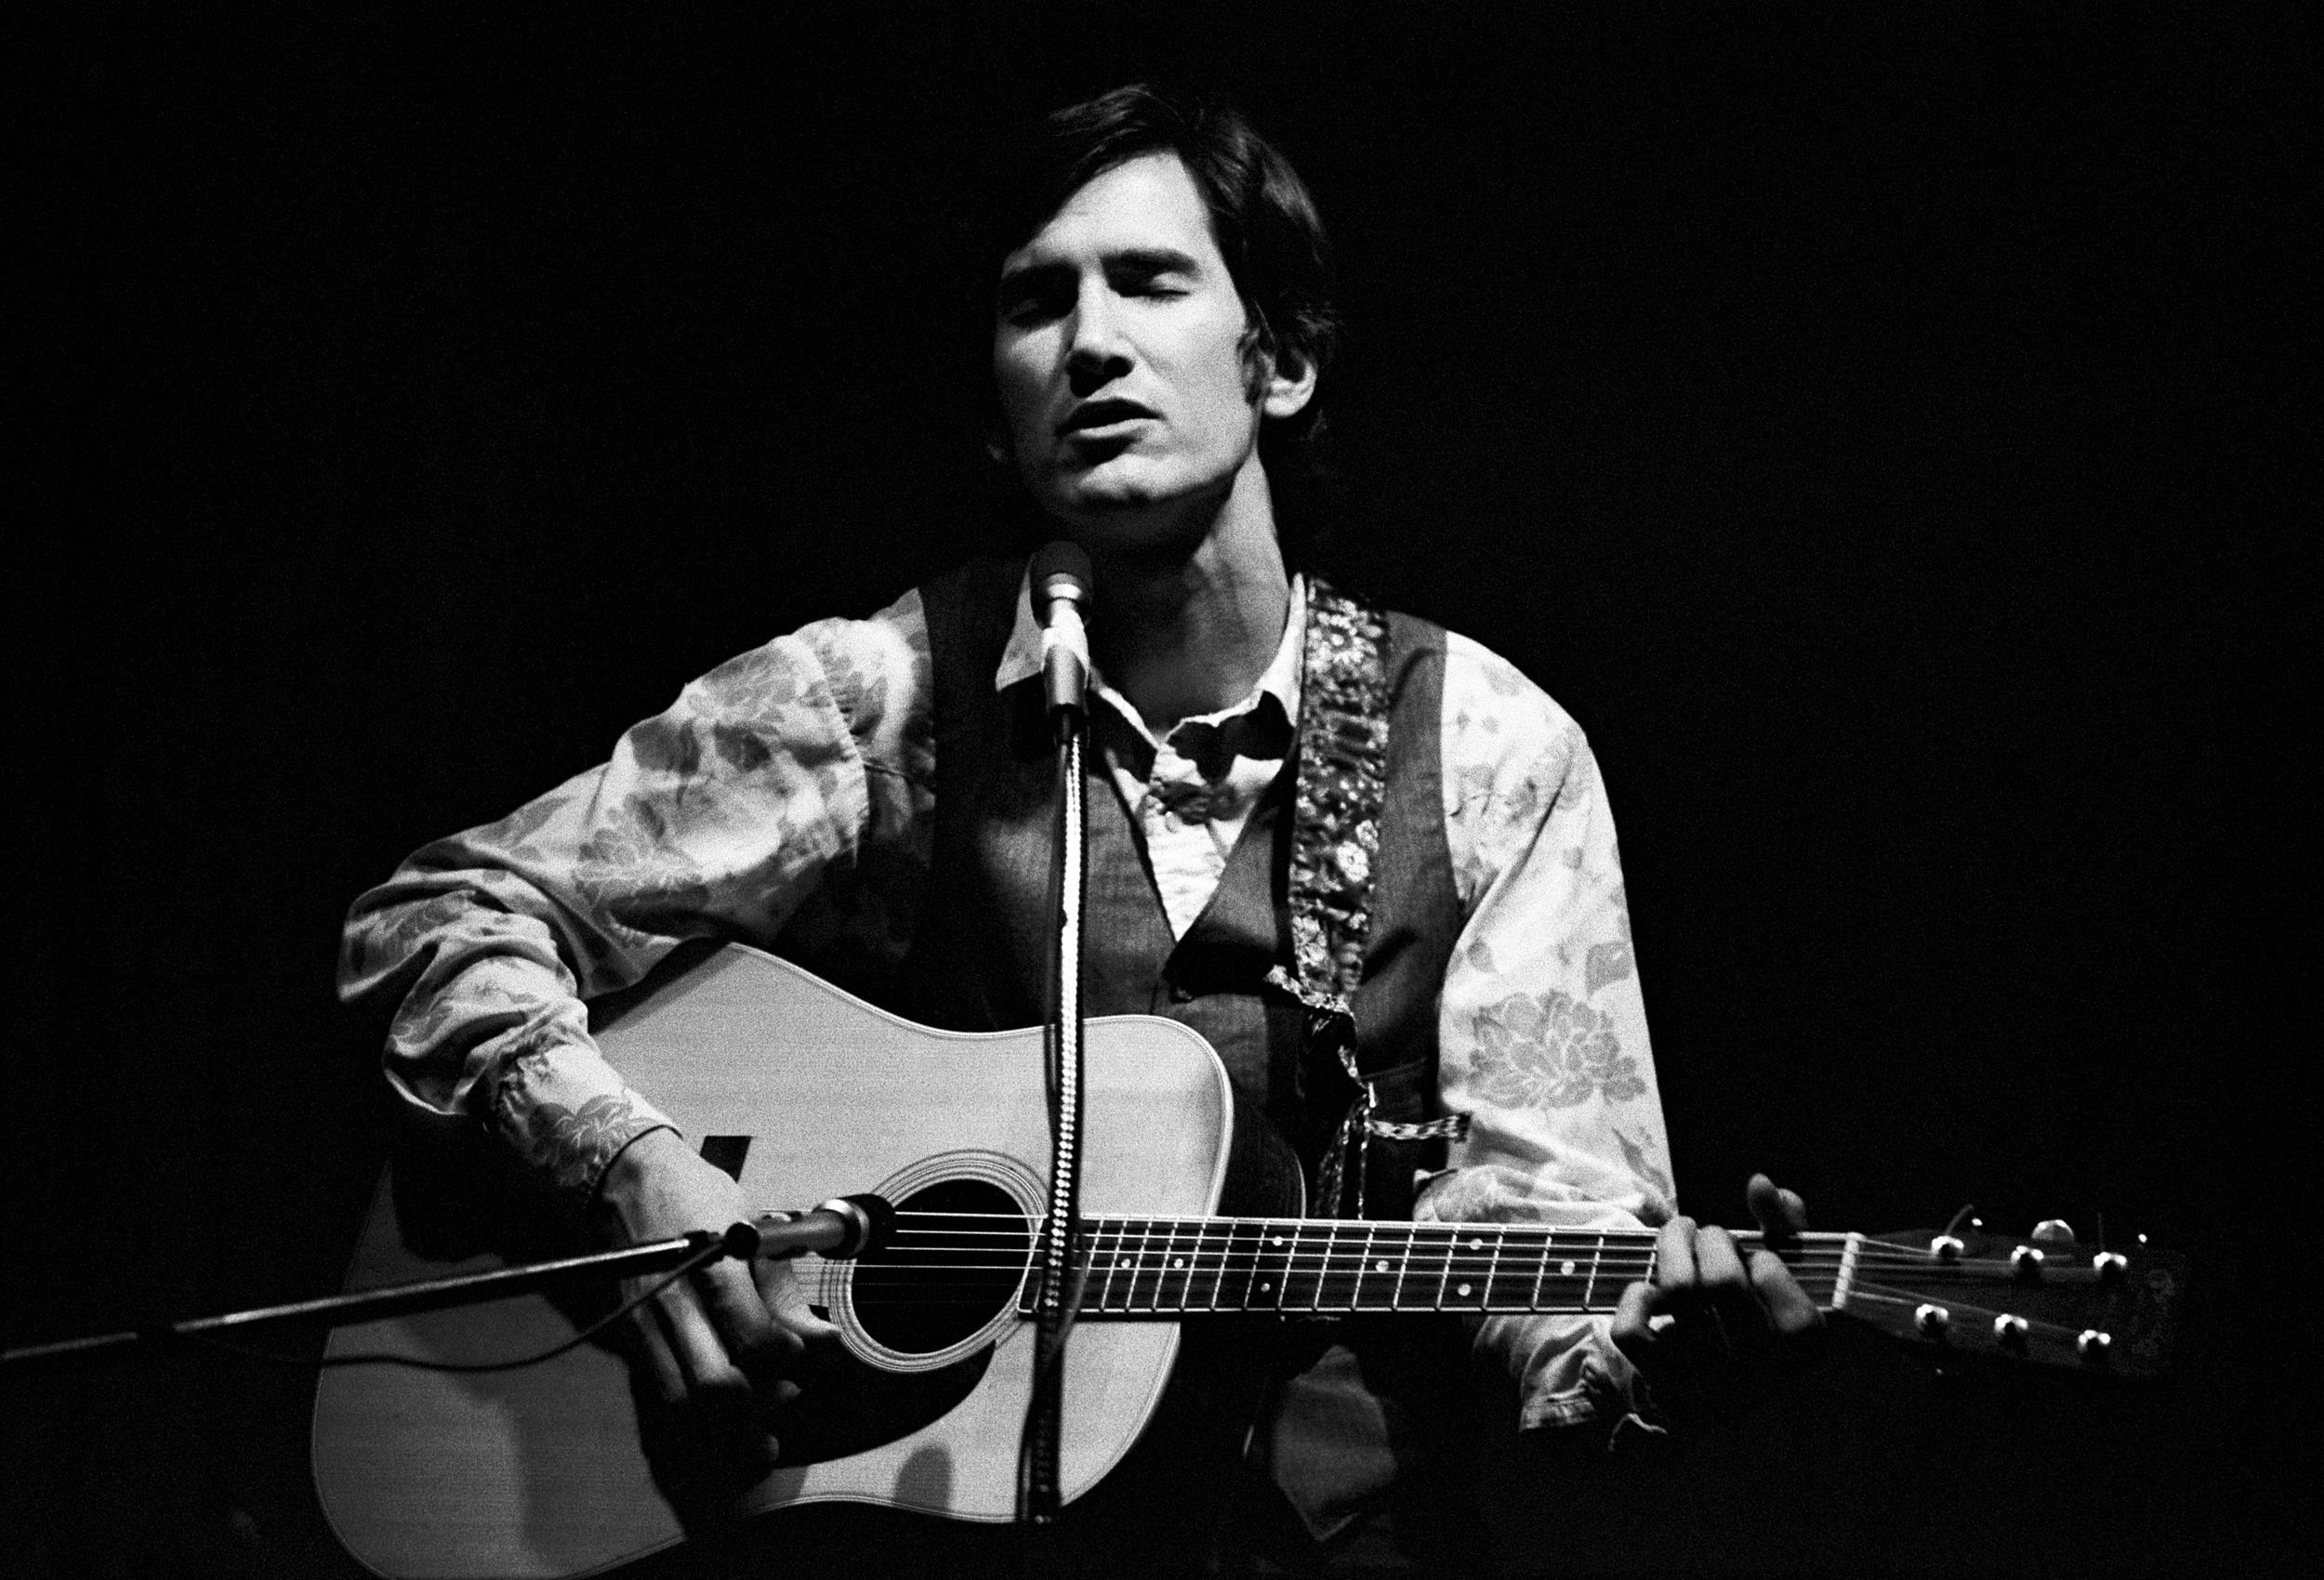 <p>It’s hard to say that Townes Van Zandt is specifically a country artist — his influence has been felt across folk, rock, and Americana — but he deserves induction alone for penning “Pancho and Lefty,” made legendary by Willie Nelson and Merle Haggard. </p><p>You may also like: <a href='https://www.yardbarker.com/entertainment/articles/20_late_career_albums_that_were_surprisingly_great/s1__38629196'>20 late career albums that were surprisingly great</a></p>